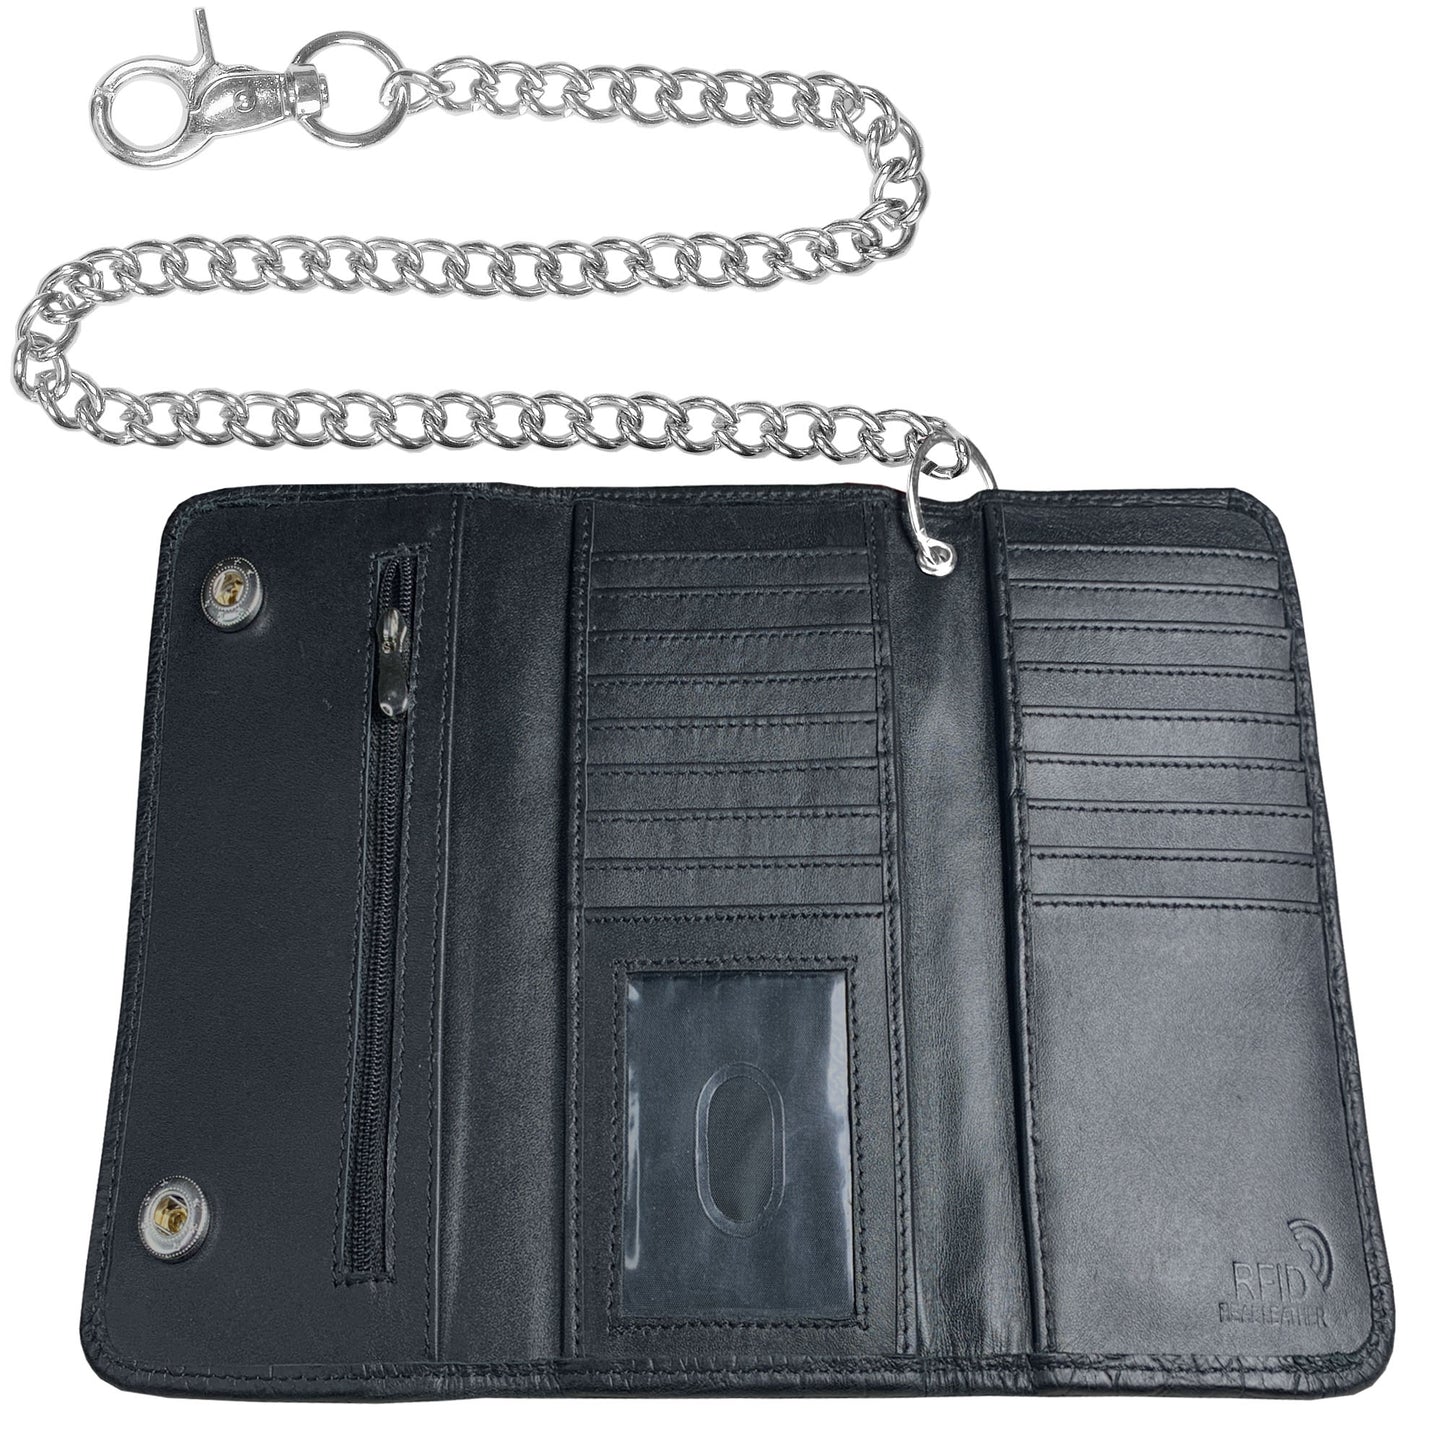 IBRO Motorcycle Chain Wallet for Men – 100% Natural Genuine Leather, Long Trifold RFID Blocking Wallet Crocodile Black